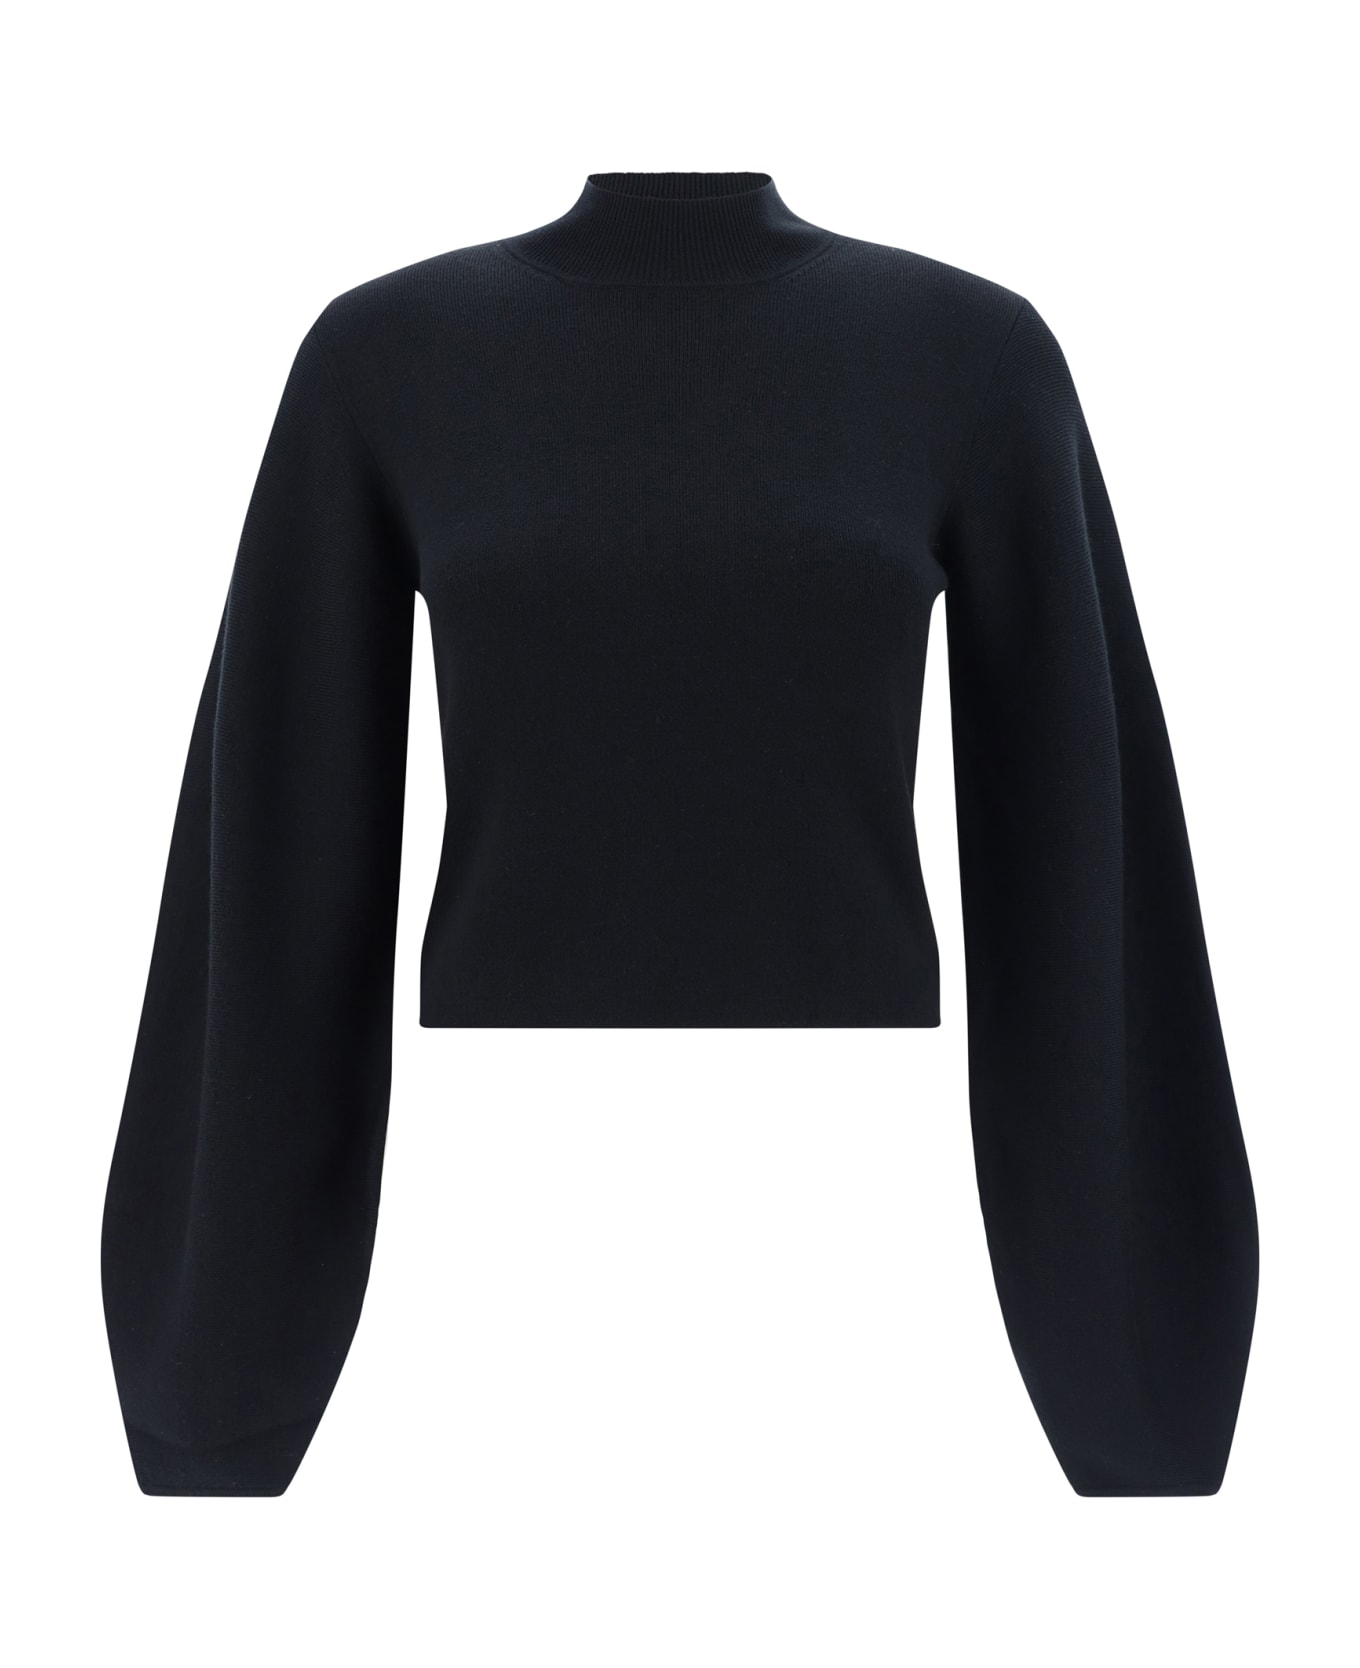 Chloé Baloon Sleeve Knit Cropped Sweater - Black